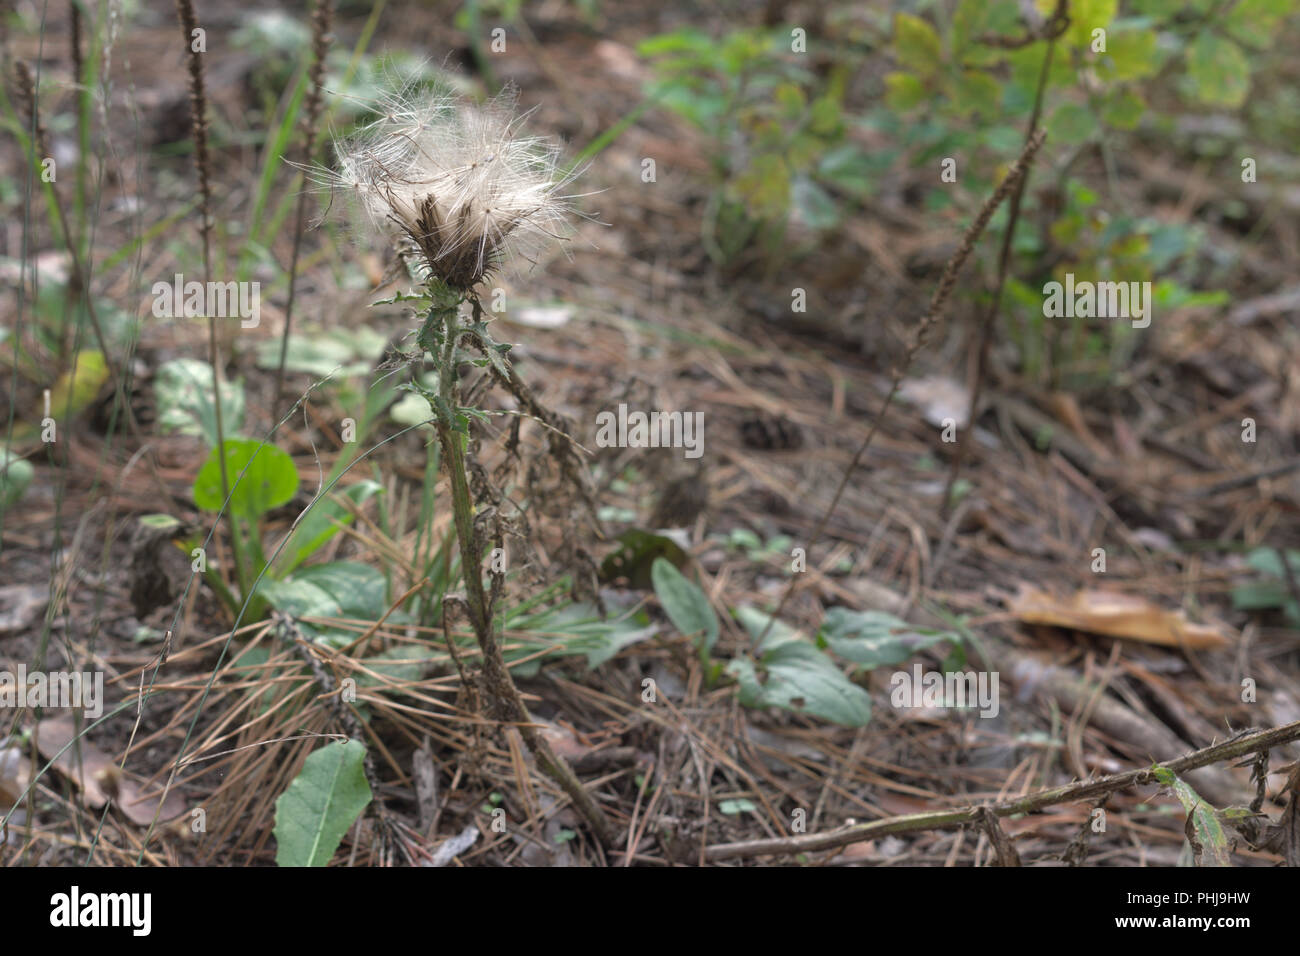 fluff departing from the ripe thistle. Details of autumn forest Stock Photo